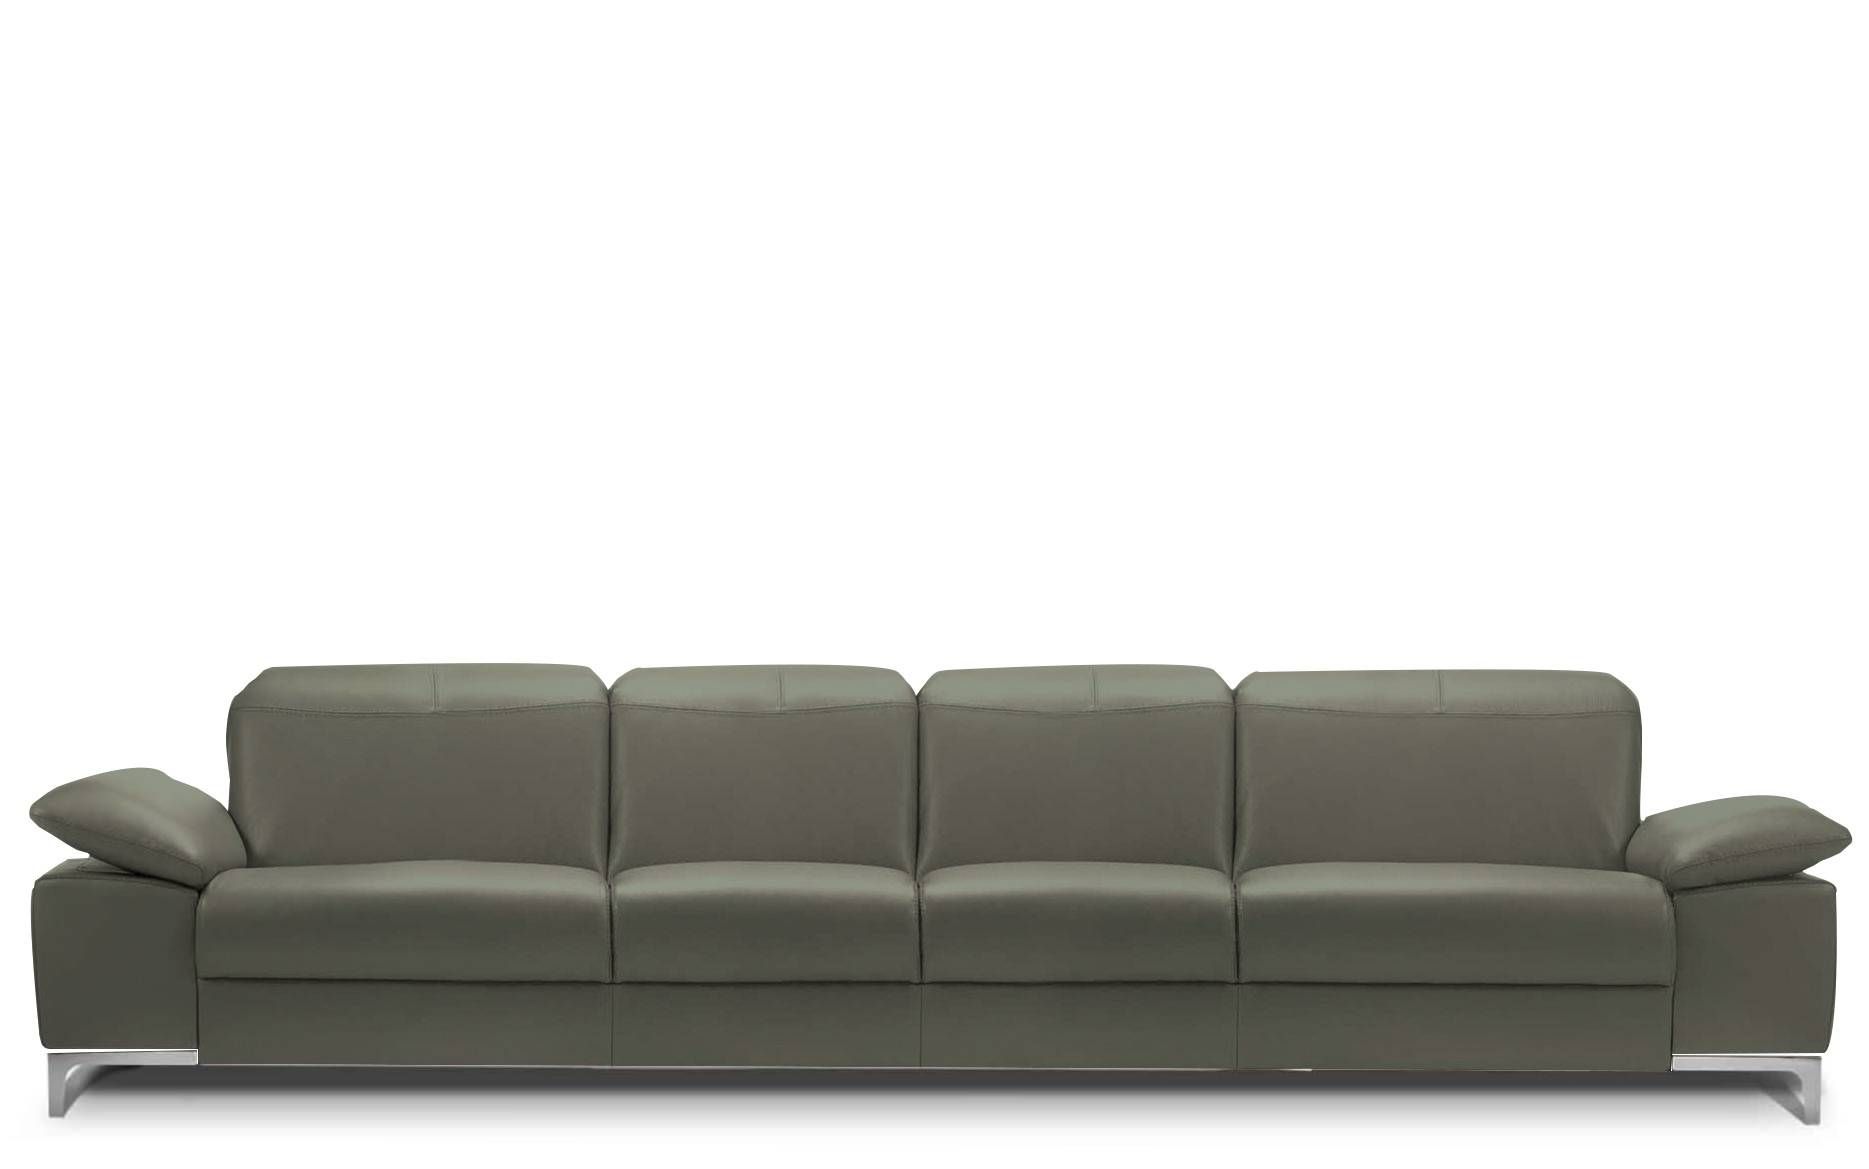 Rom Chronos 4 Seater Leather Sofa | Buy At Kontenta In 4 Seater Sofas (View 7 of 30)